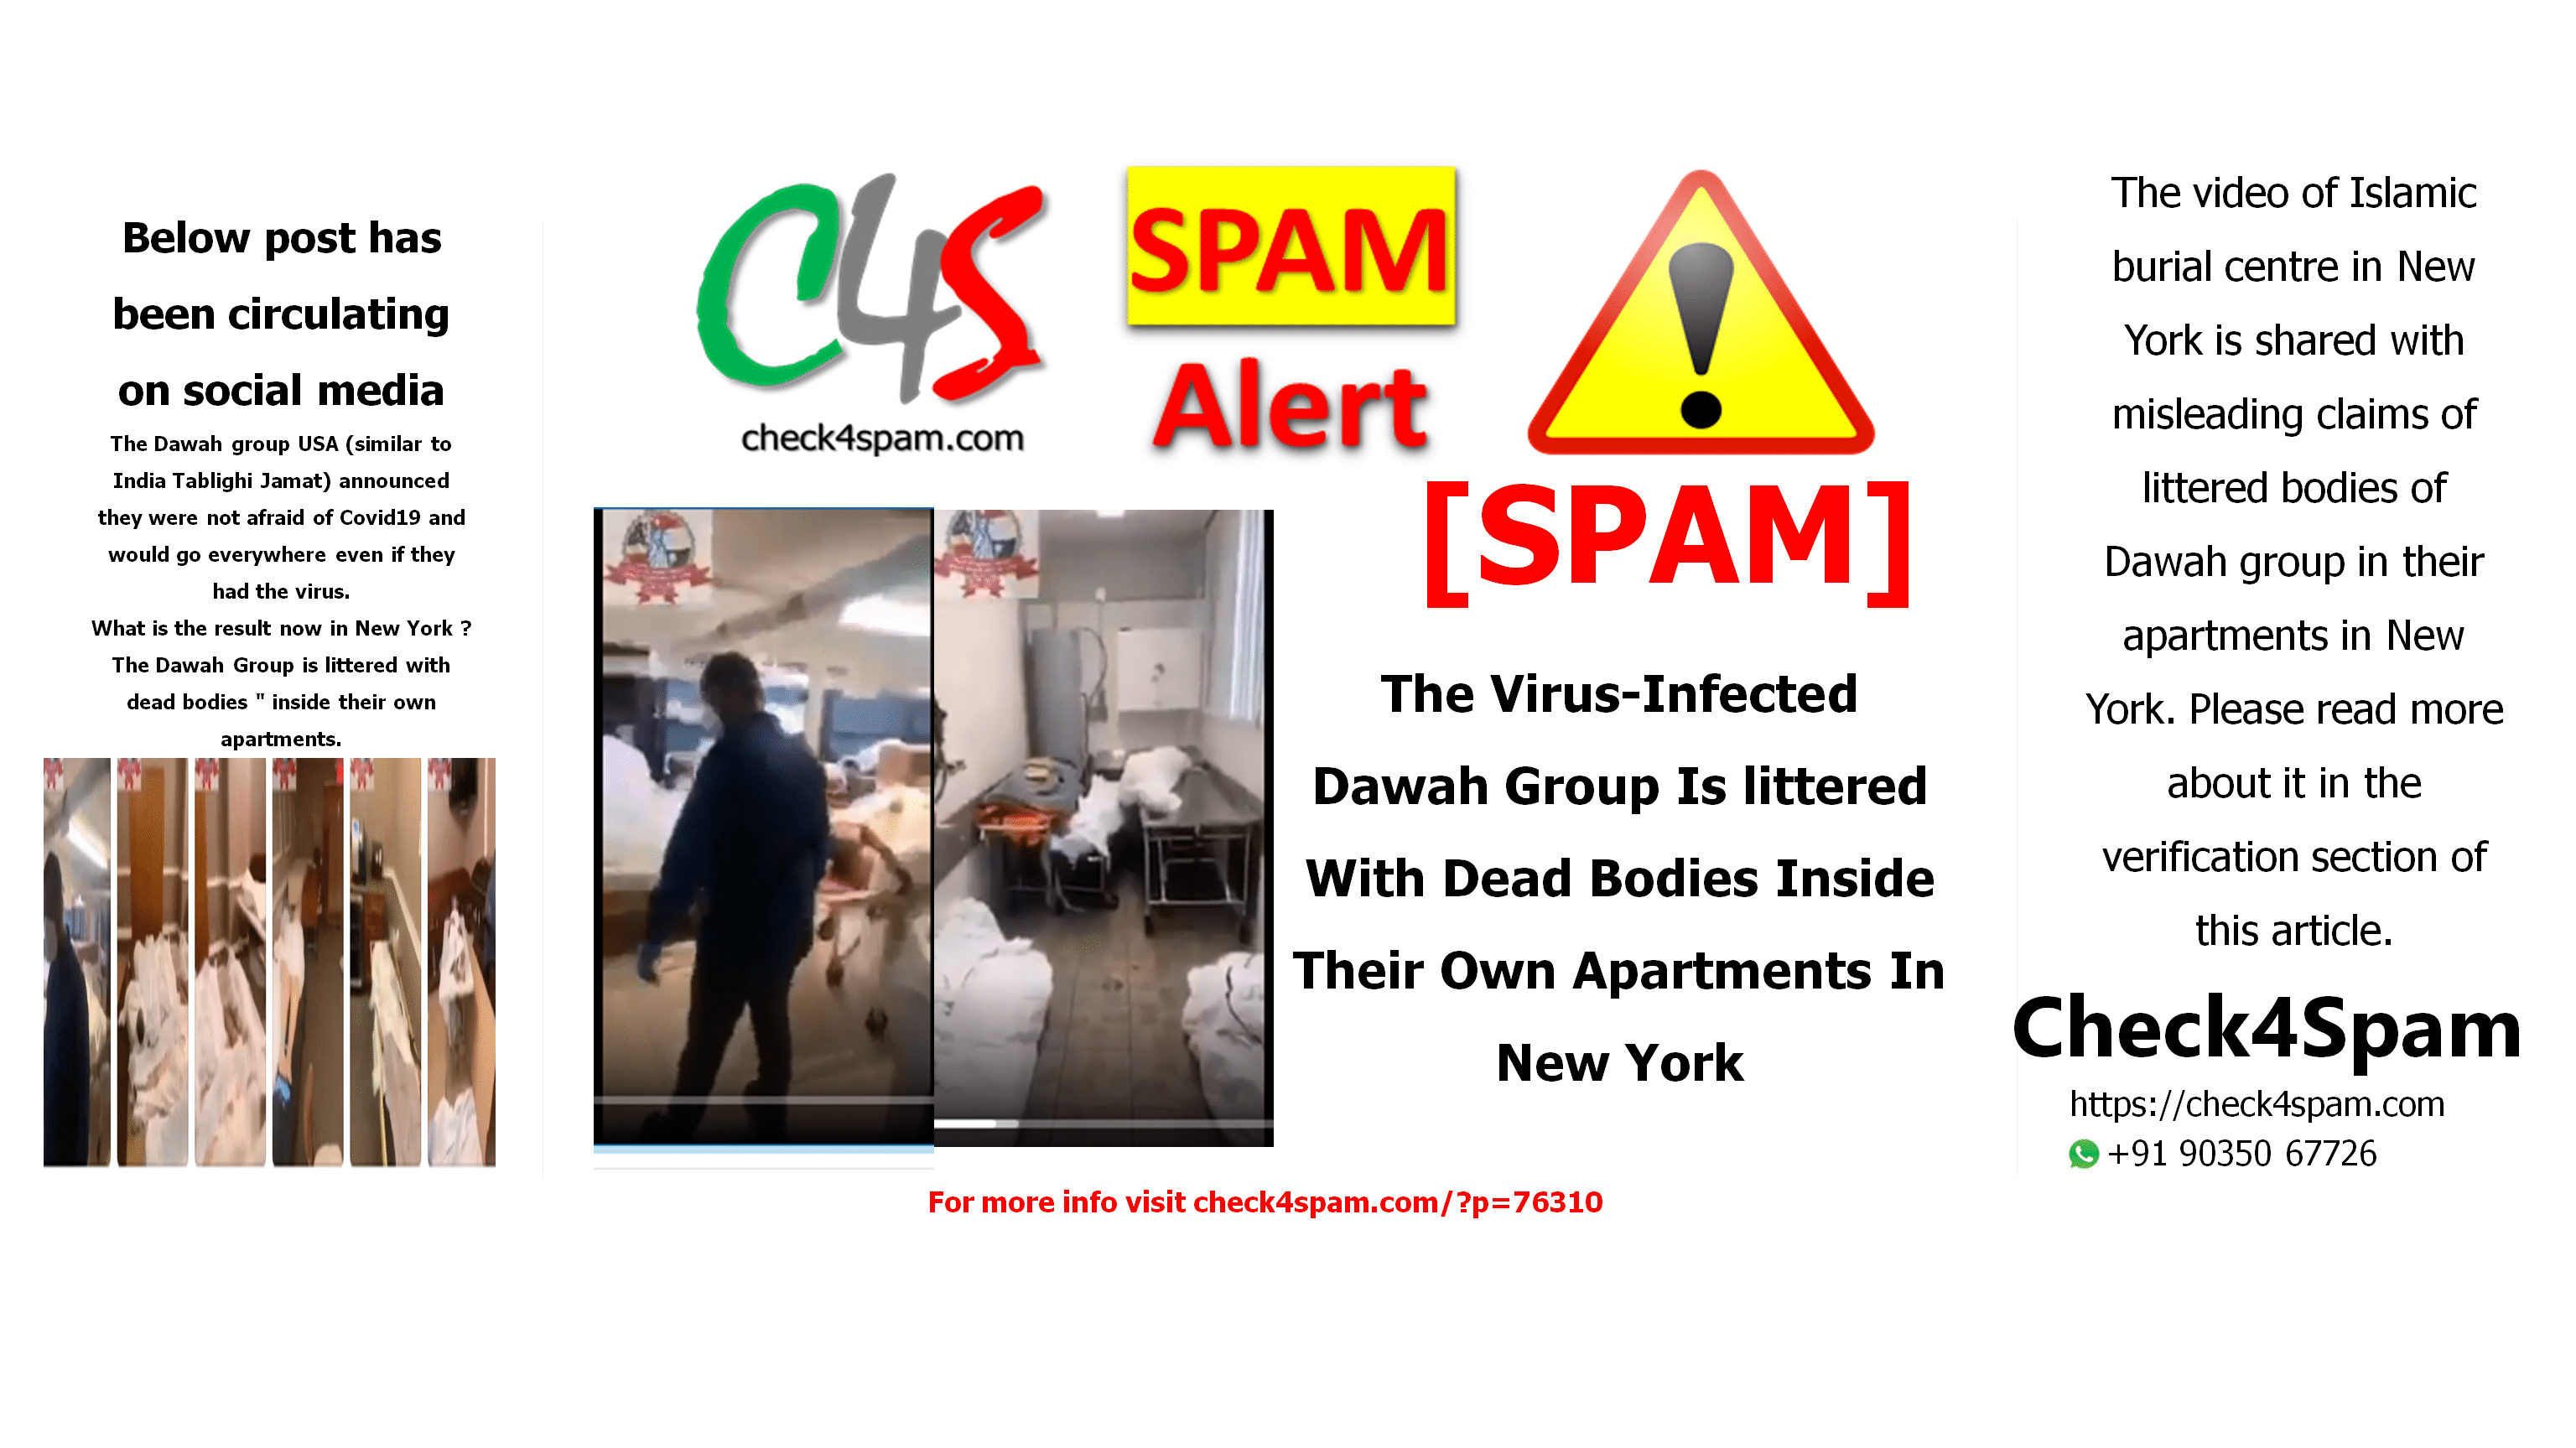 The Virus-Infected Dawah Group Is littered With Dead Bodies Inside Their Own Apartments In New York